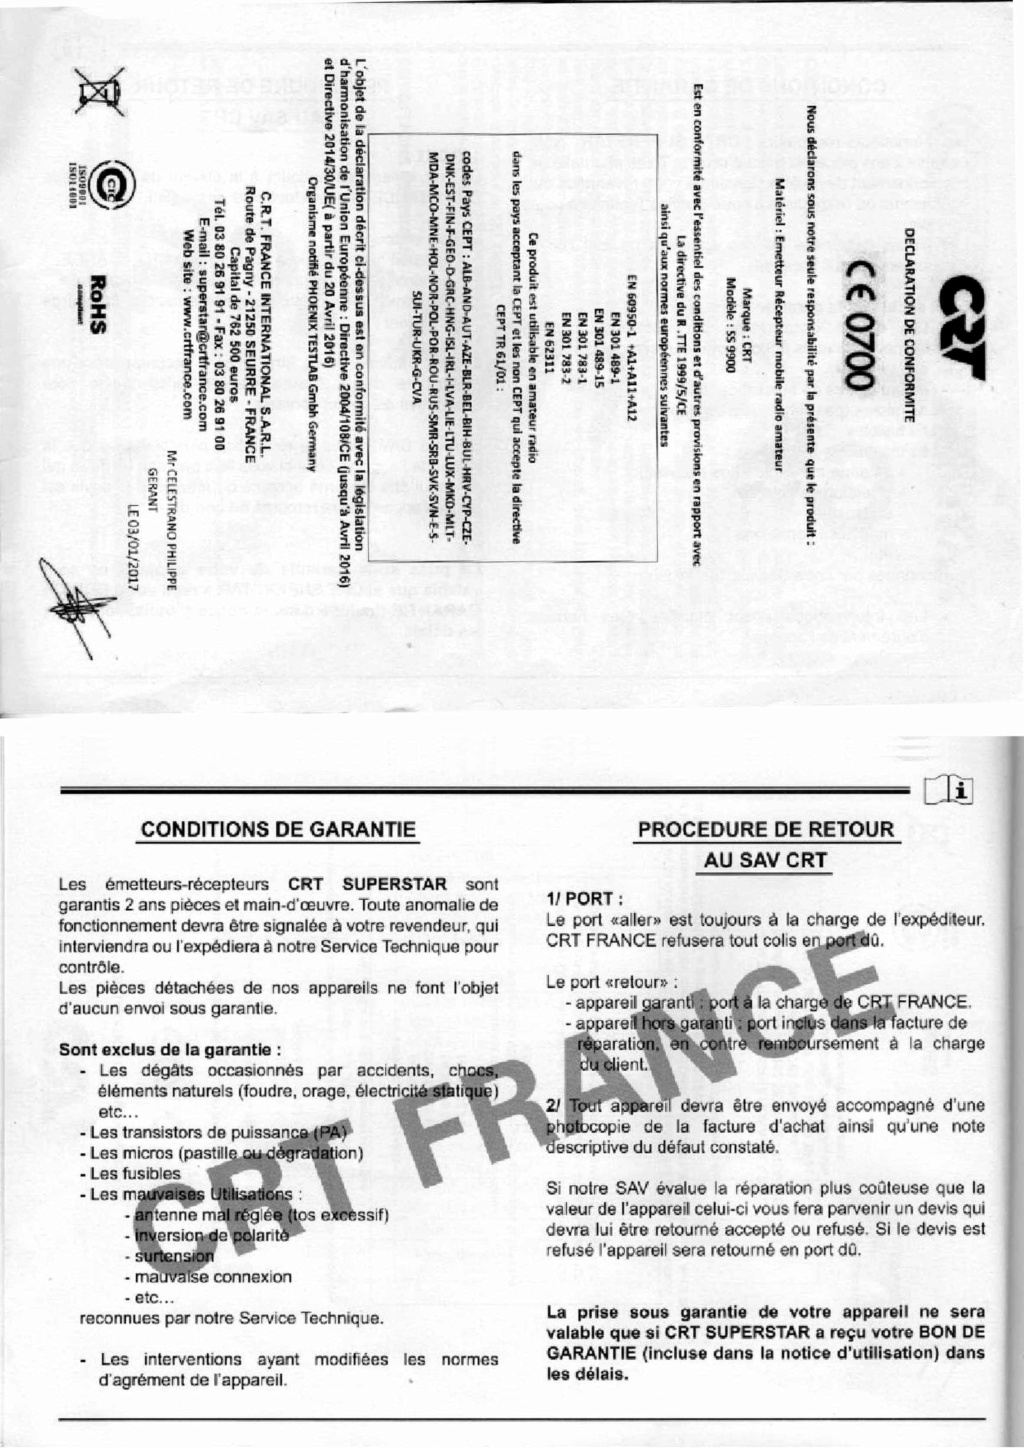 manuel - CRT SS 9900 v4 (Mobile) - Page 14 Feuill22